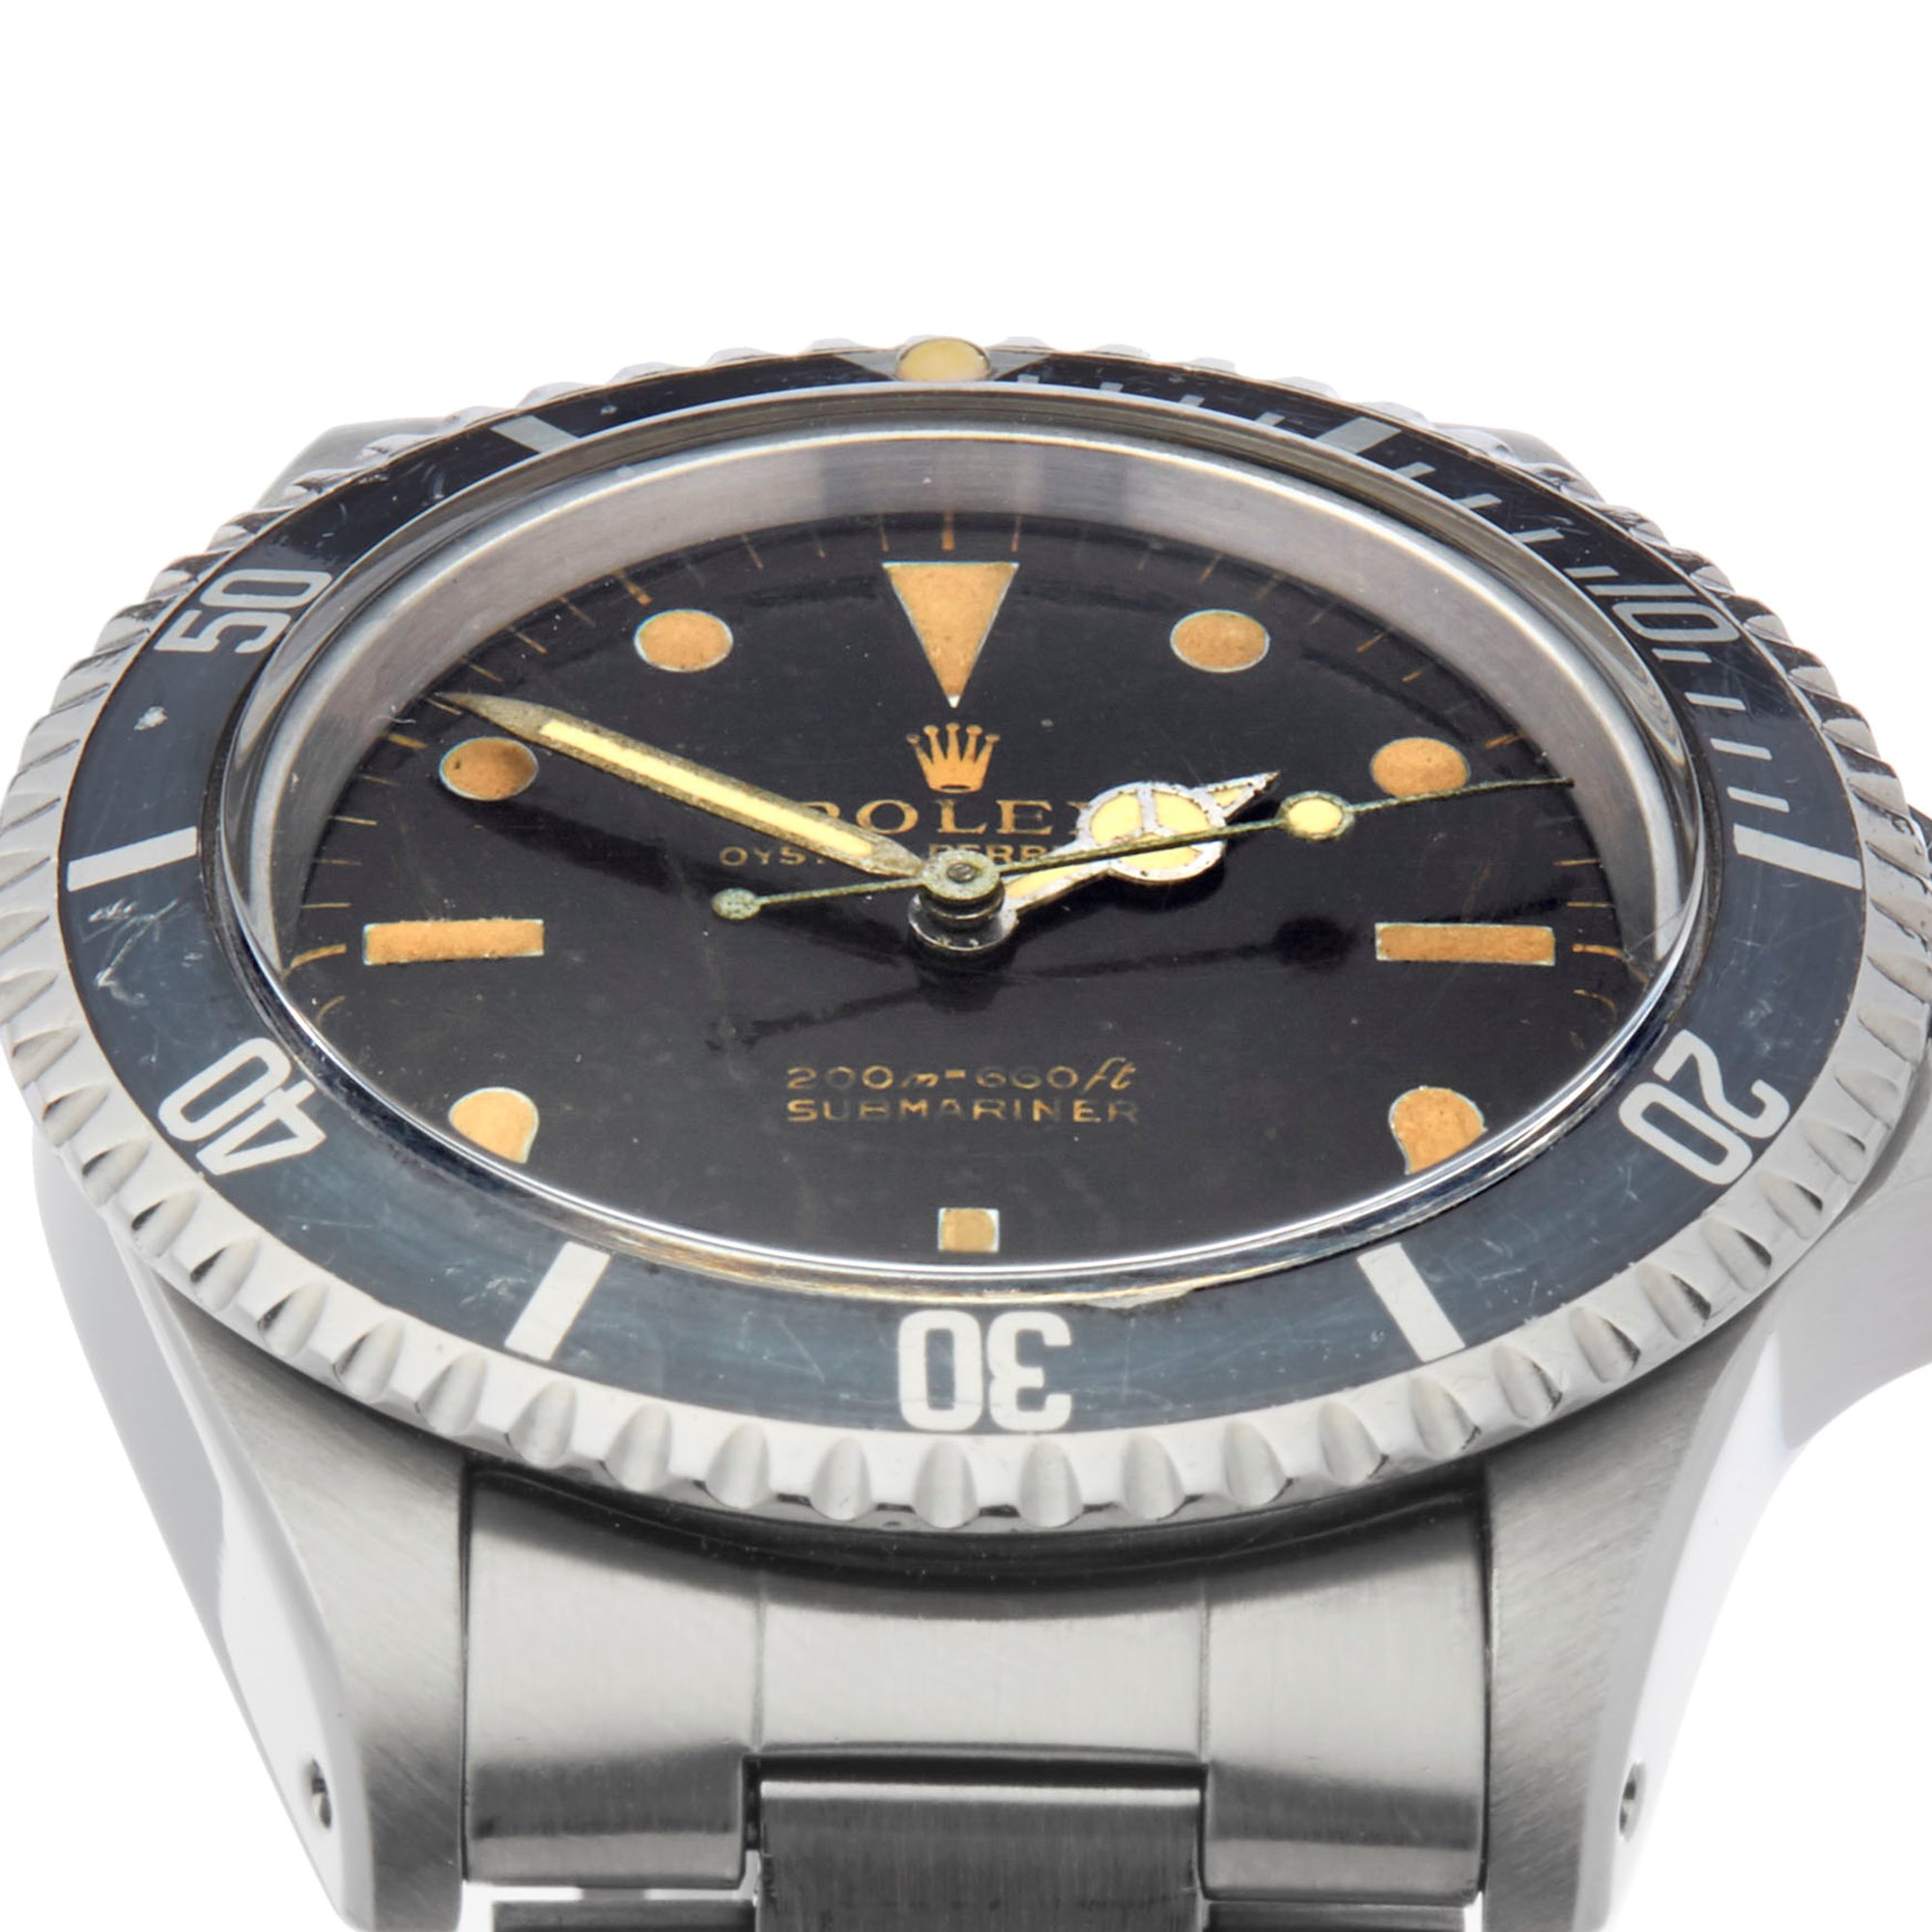 Rolex Submariner No Date Gilt Gloss Meters First Stainless Steel - 5513 Stainless Steel 5513